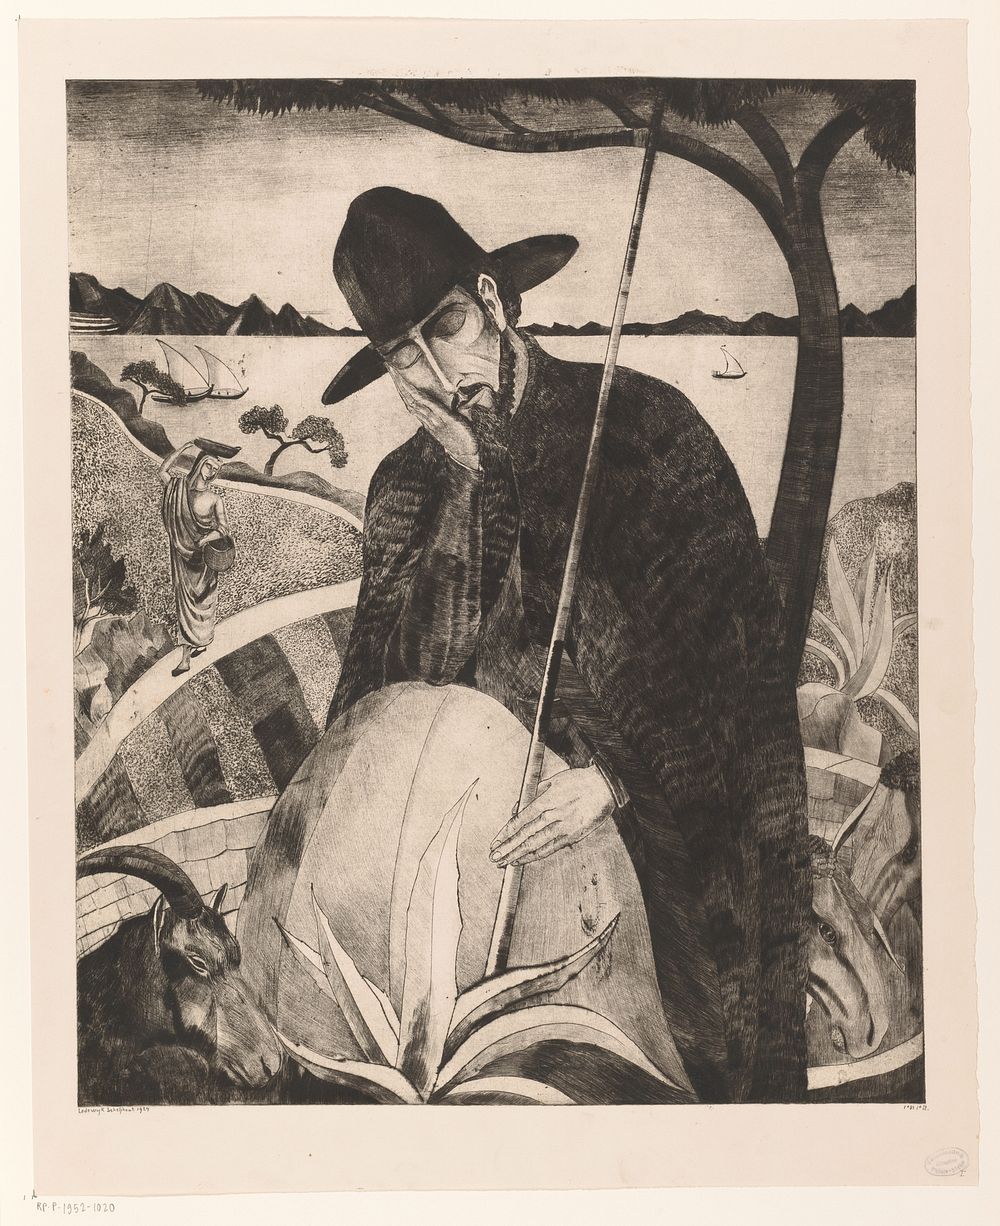 Corsicaanse herder (1924) by Lodewijk Schelfhout and N V Roeloffzen and Hübner